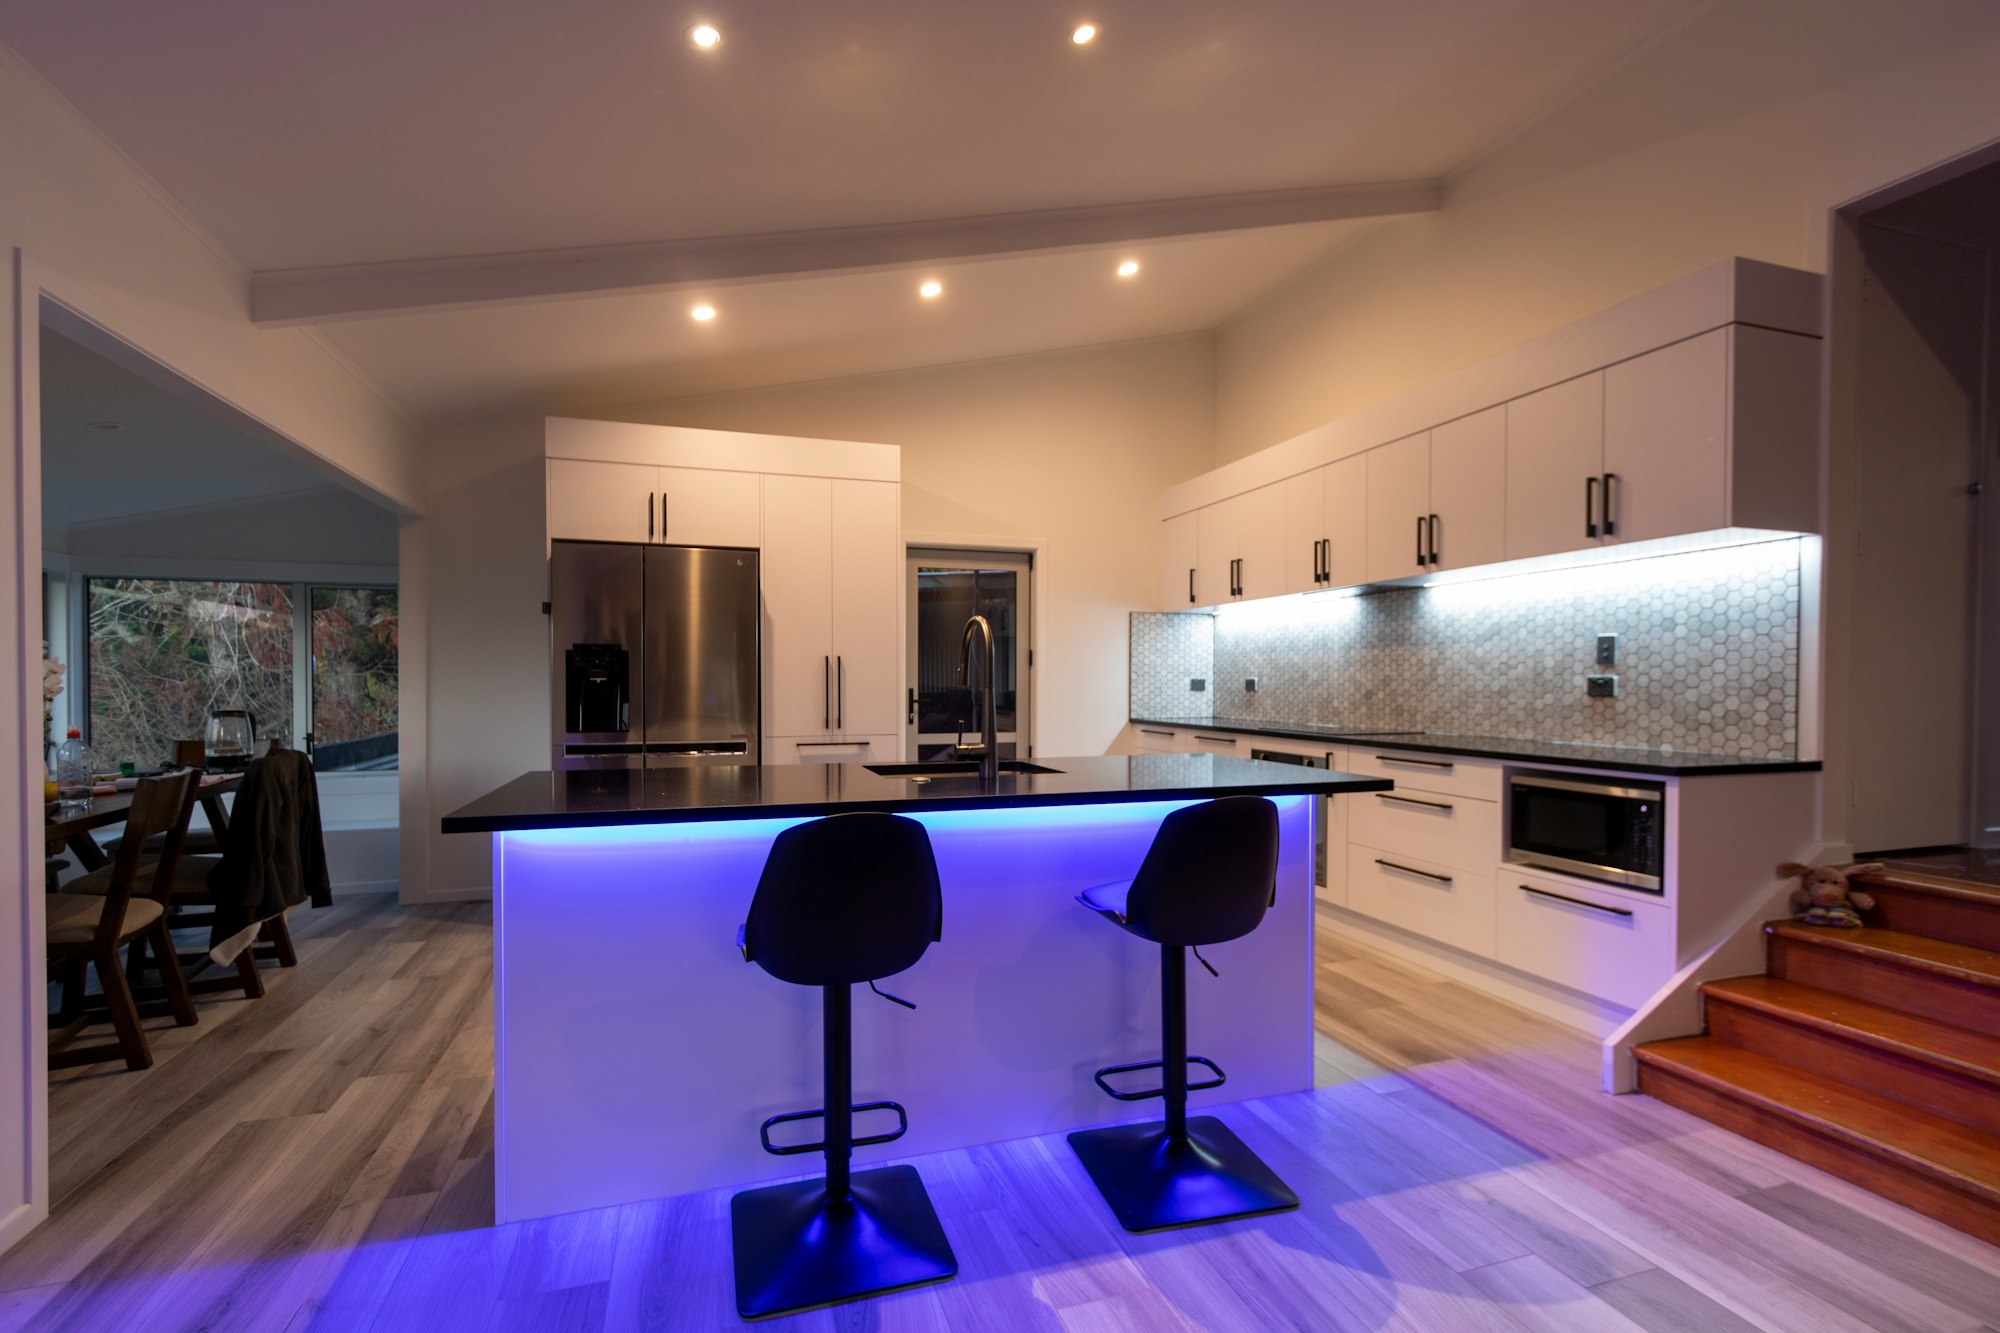 A modern white kitchen with led strip lighting